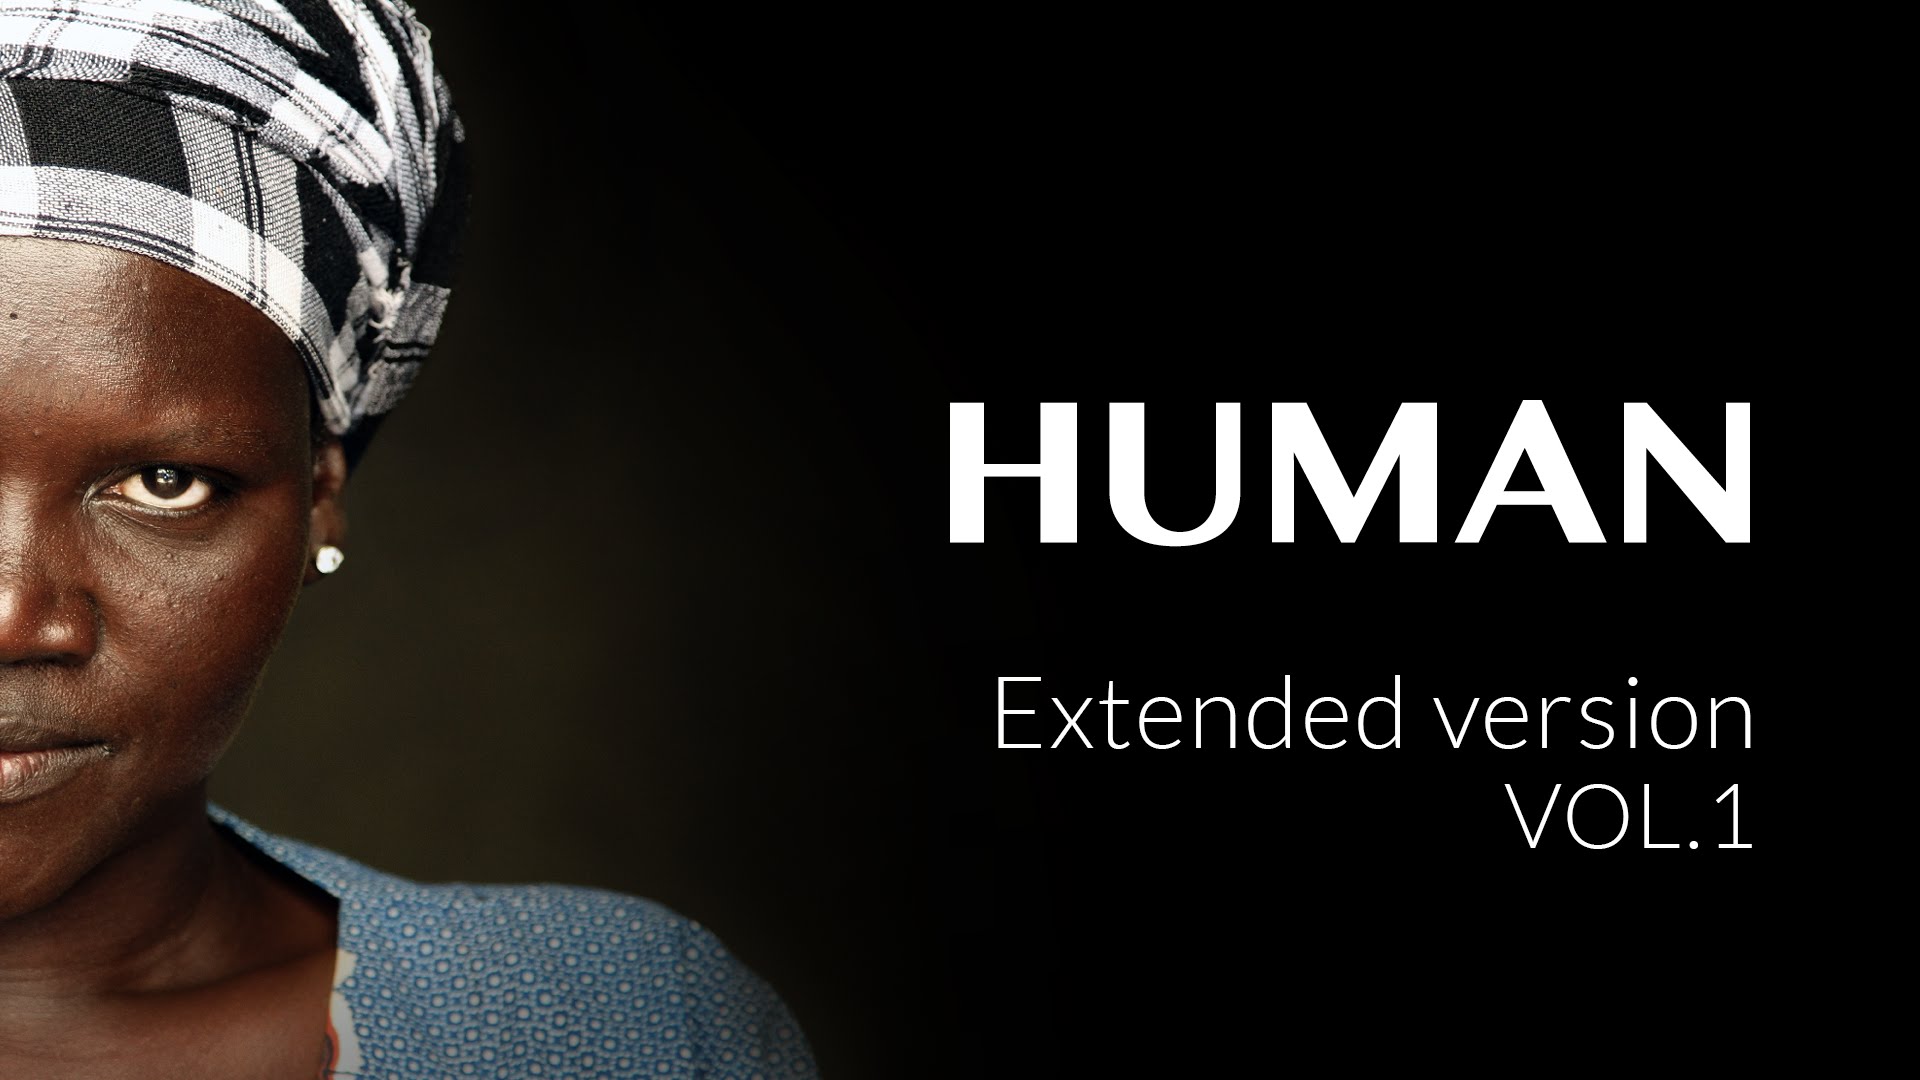 HUMAN Extended version VOL.1 - YouTube